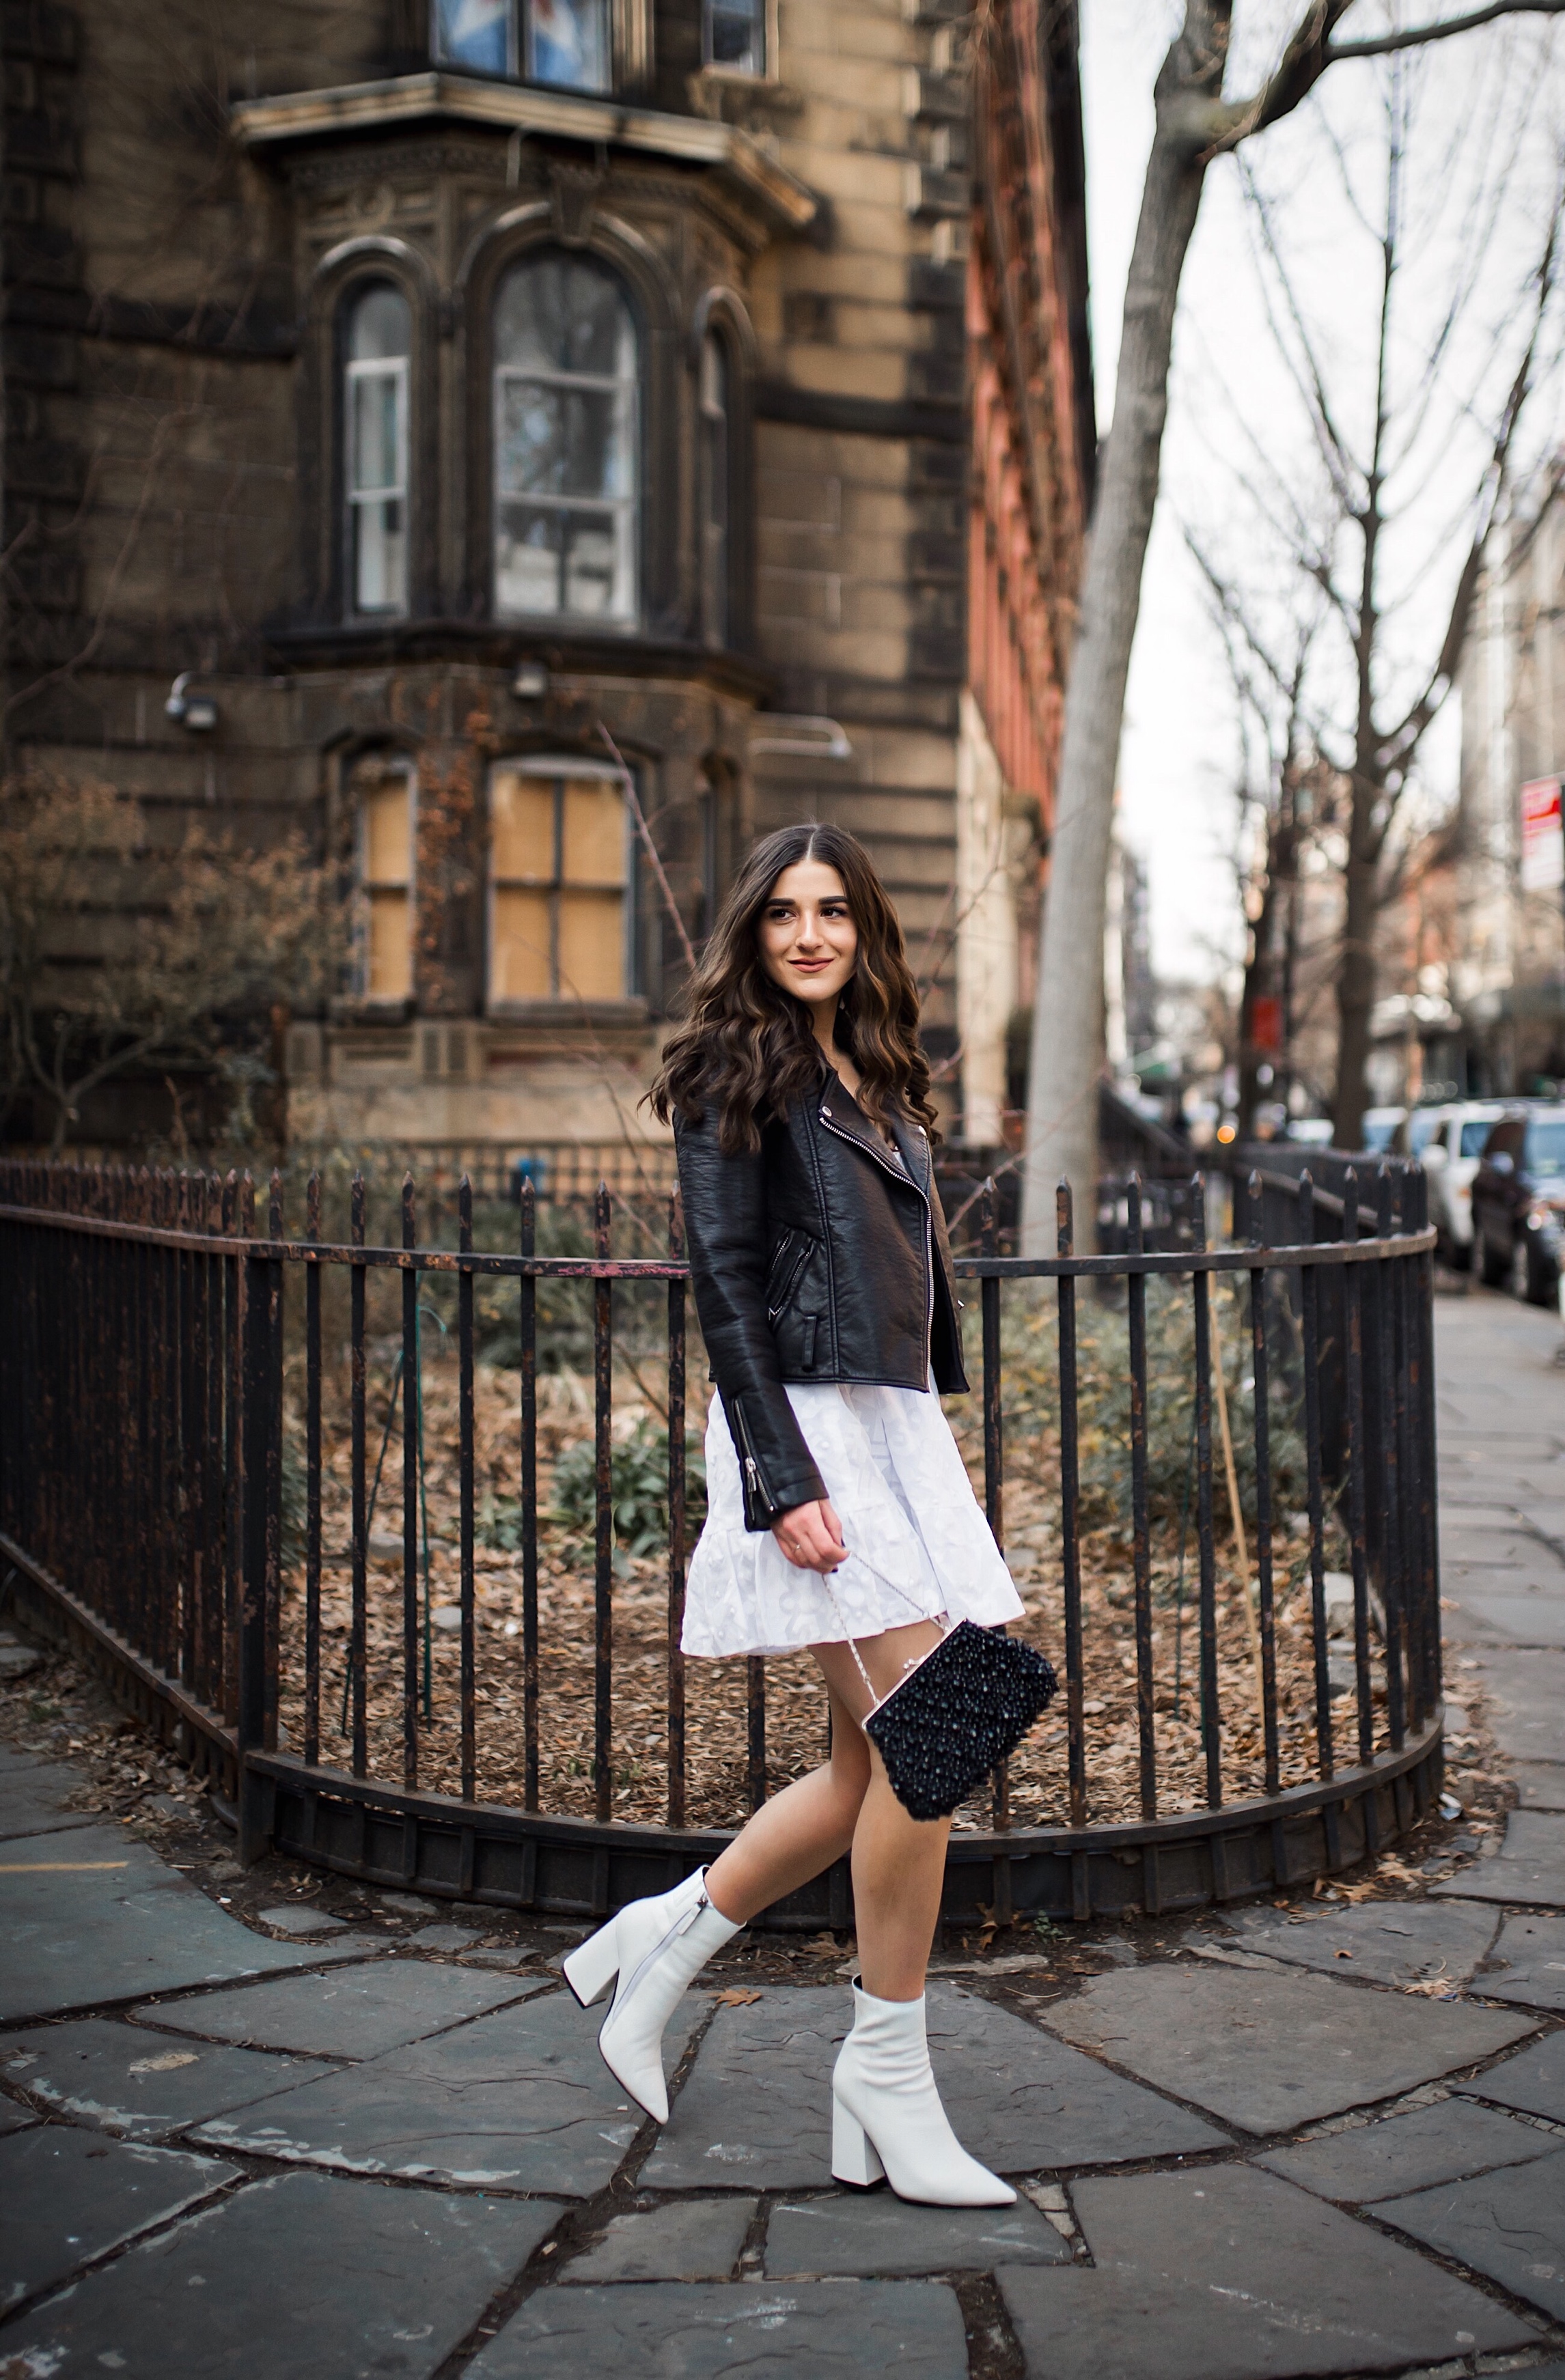 5 Things I Wish Brands Knew White Dress Leather Jacket Esther Santer Fashion Blog NYC Street Style Blogger Outfit OOTD Trendy Shopping Girl What How To Wear Urban Outfitters ASOS Belt Booties Black Beaded Clutch Long Hair Photoshoot Stuyvesant Shop.JPG